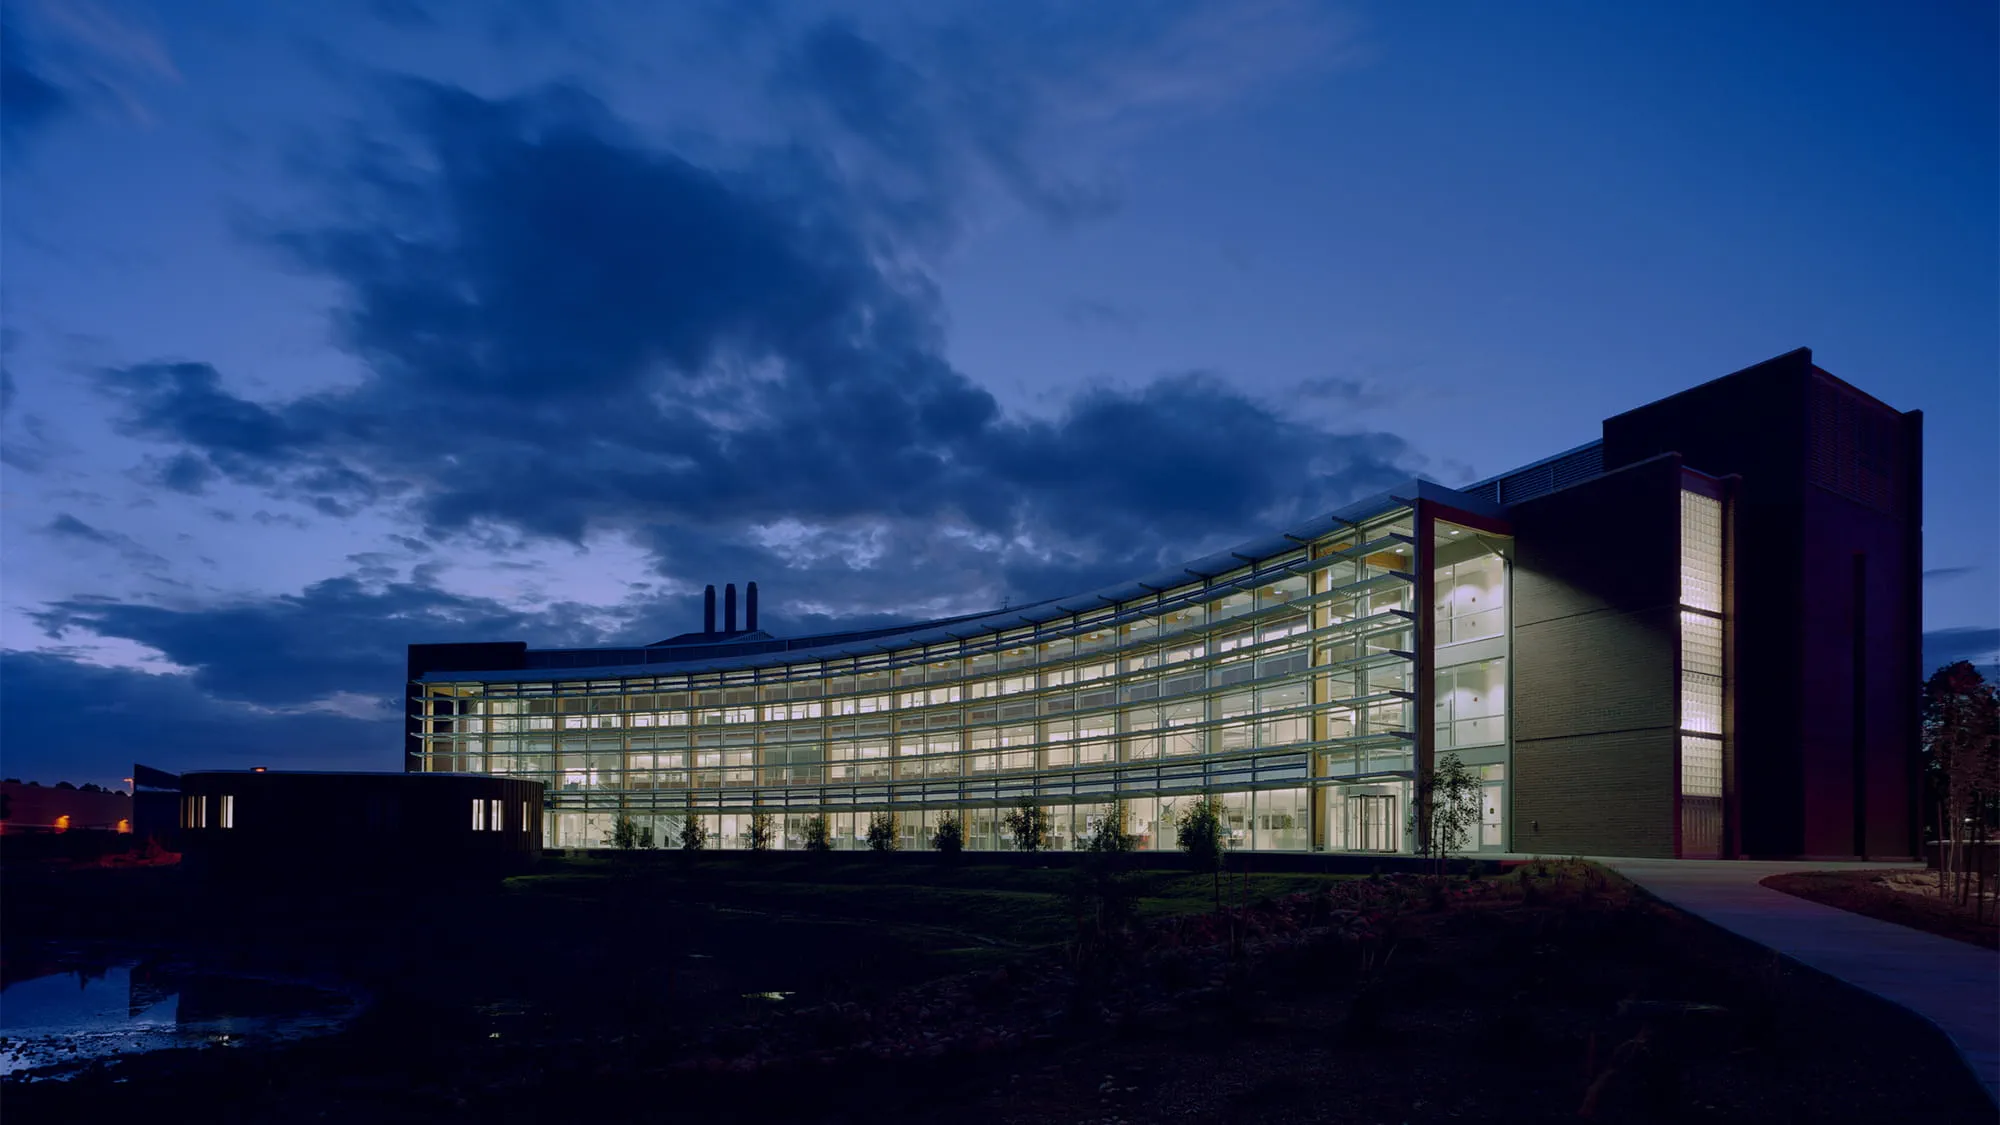 The NAU applied research development facility is one of the most sustainable buidings ever rated under the LEED system. Photo: Timothy Hursley